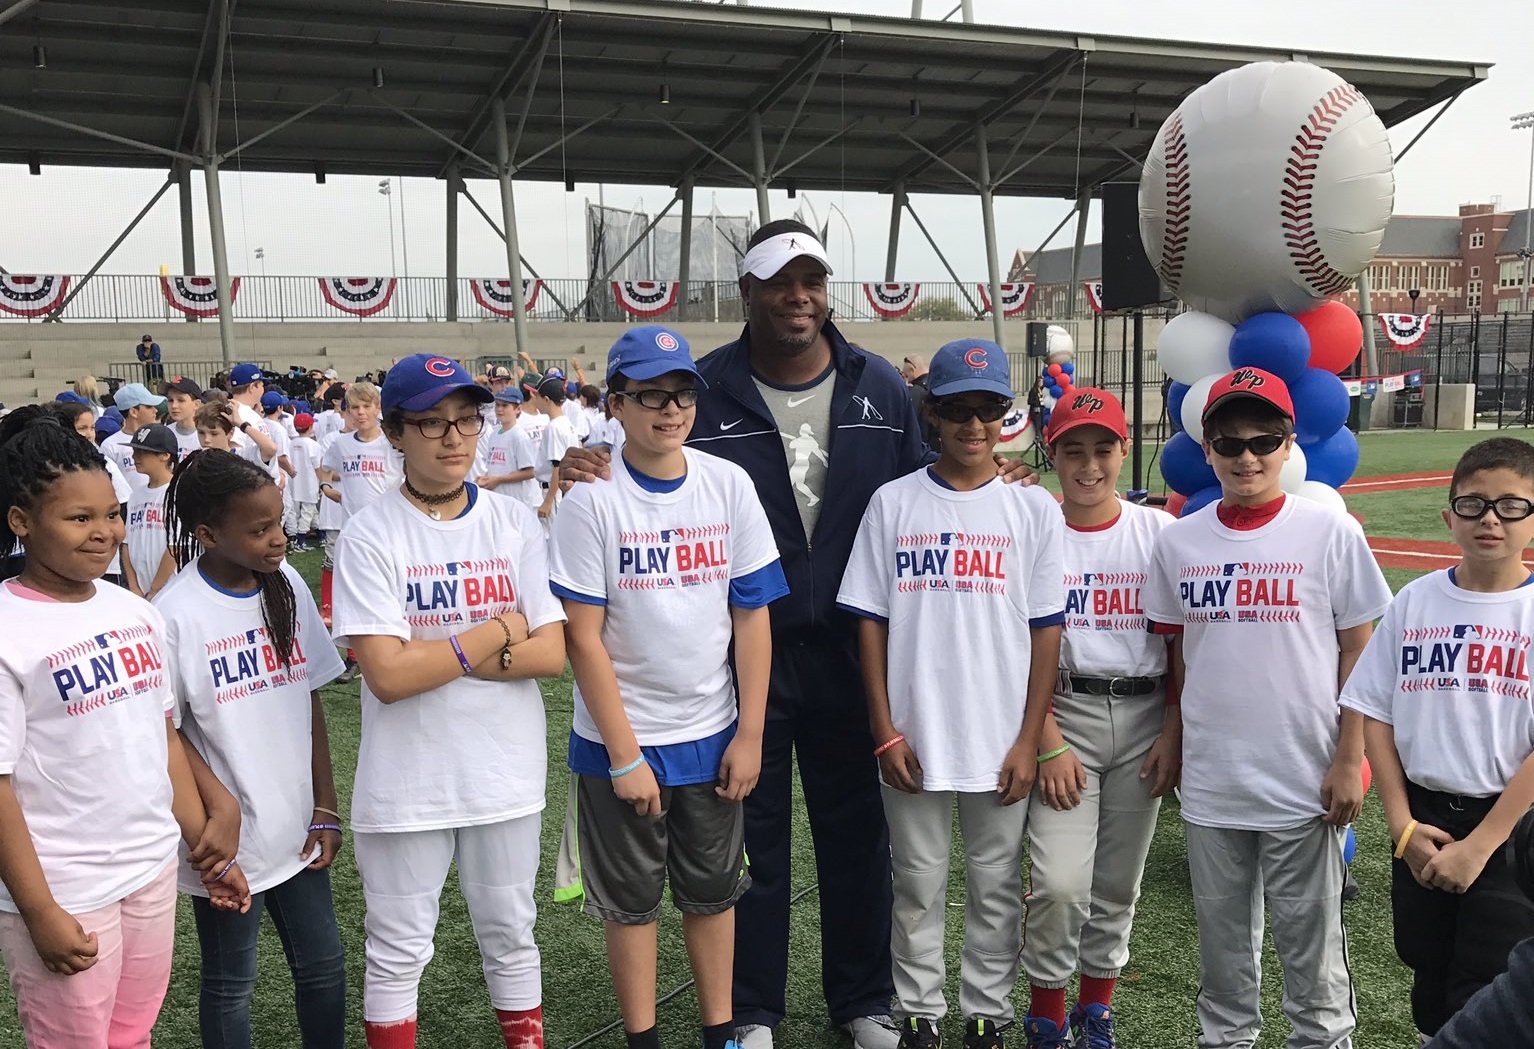 Team USA players watch in awe as MLB-great Ken Griffey Jr. takes